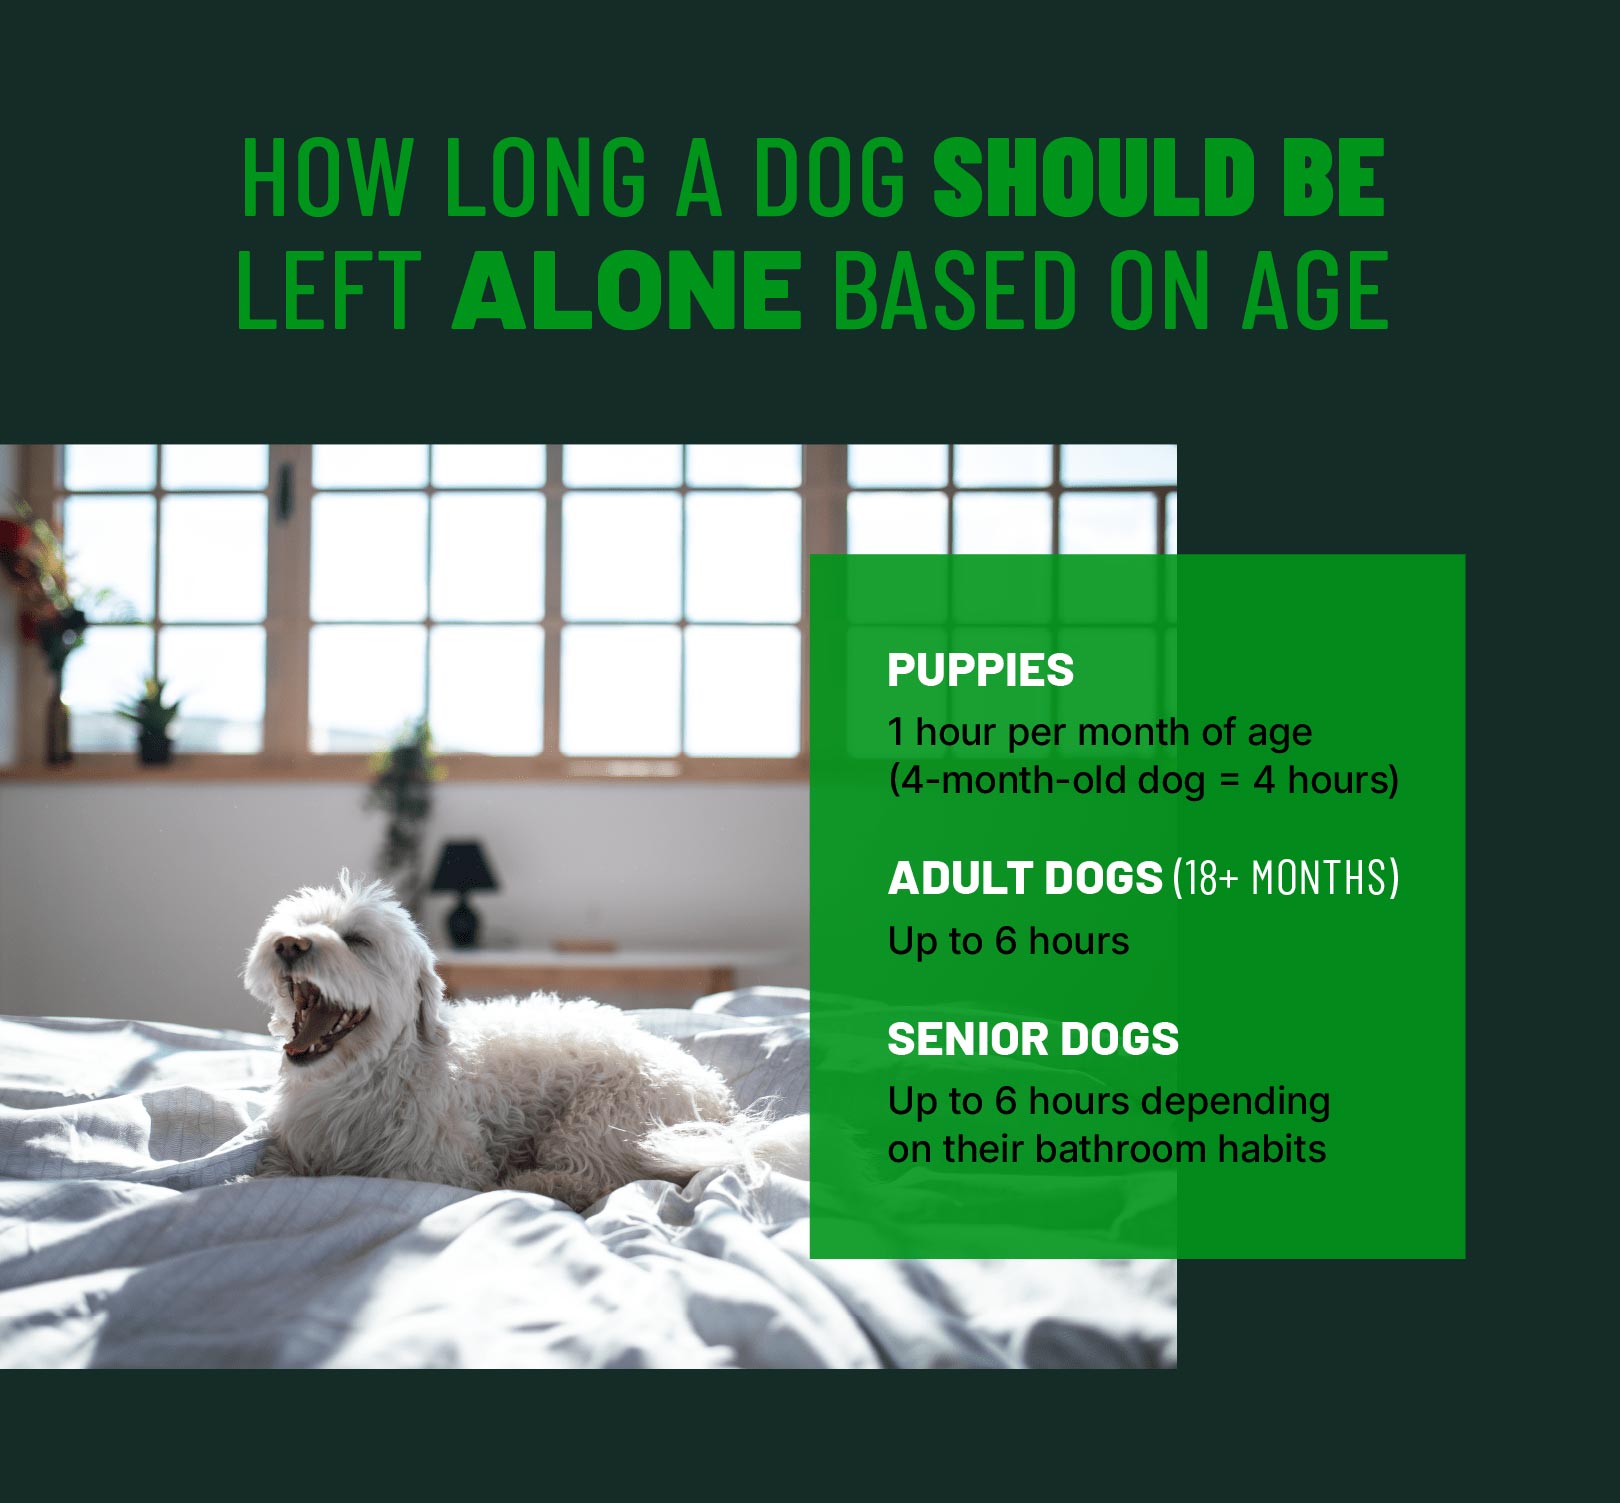 Illustrations and copy explaining how long a dog can be left home alone based on age